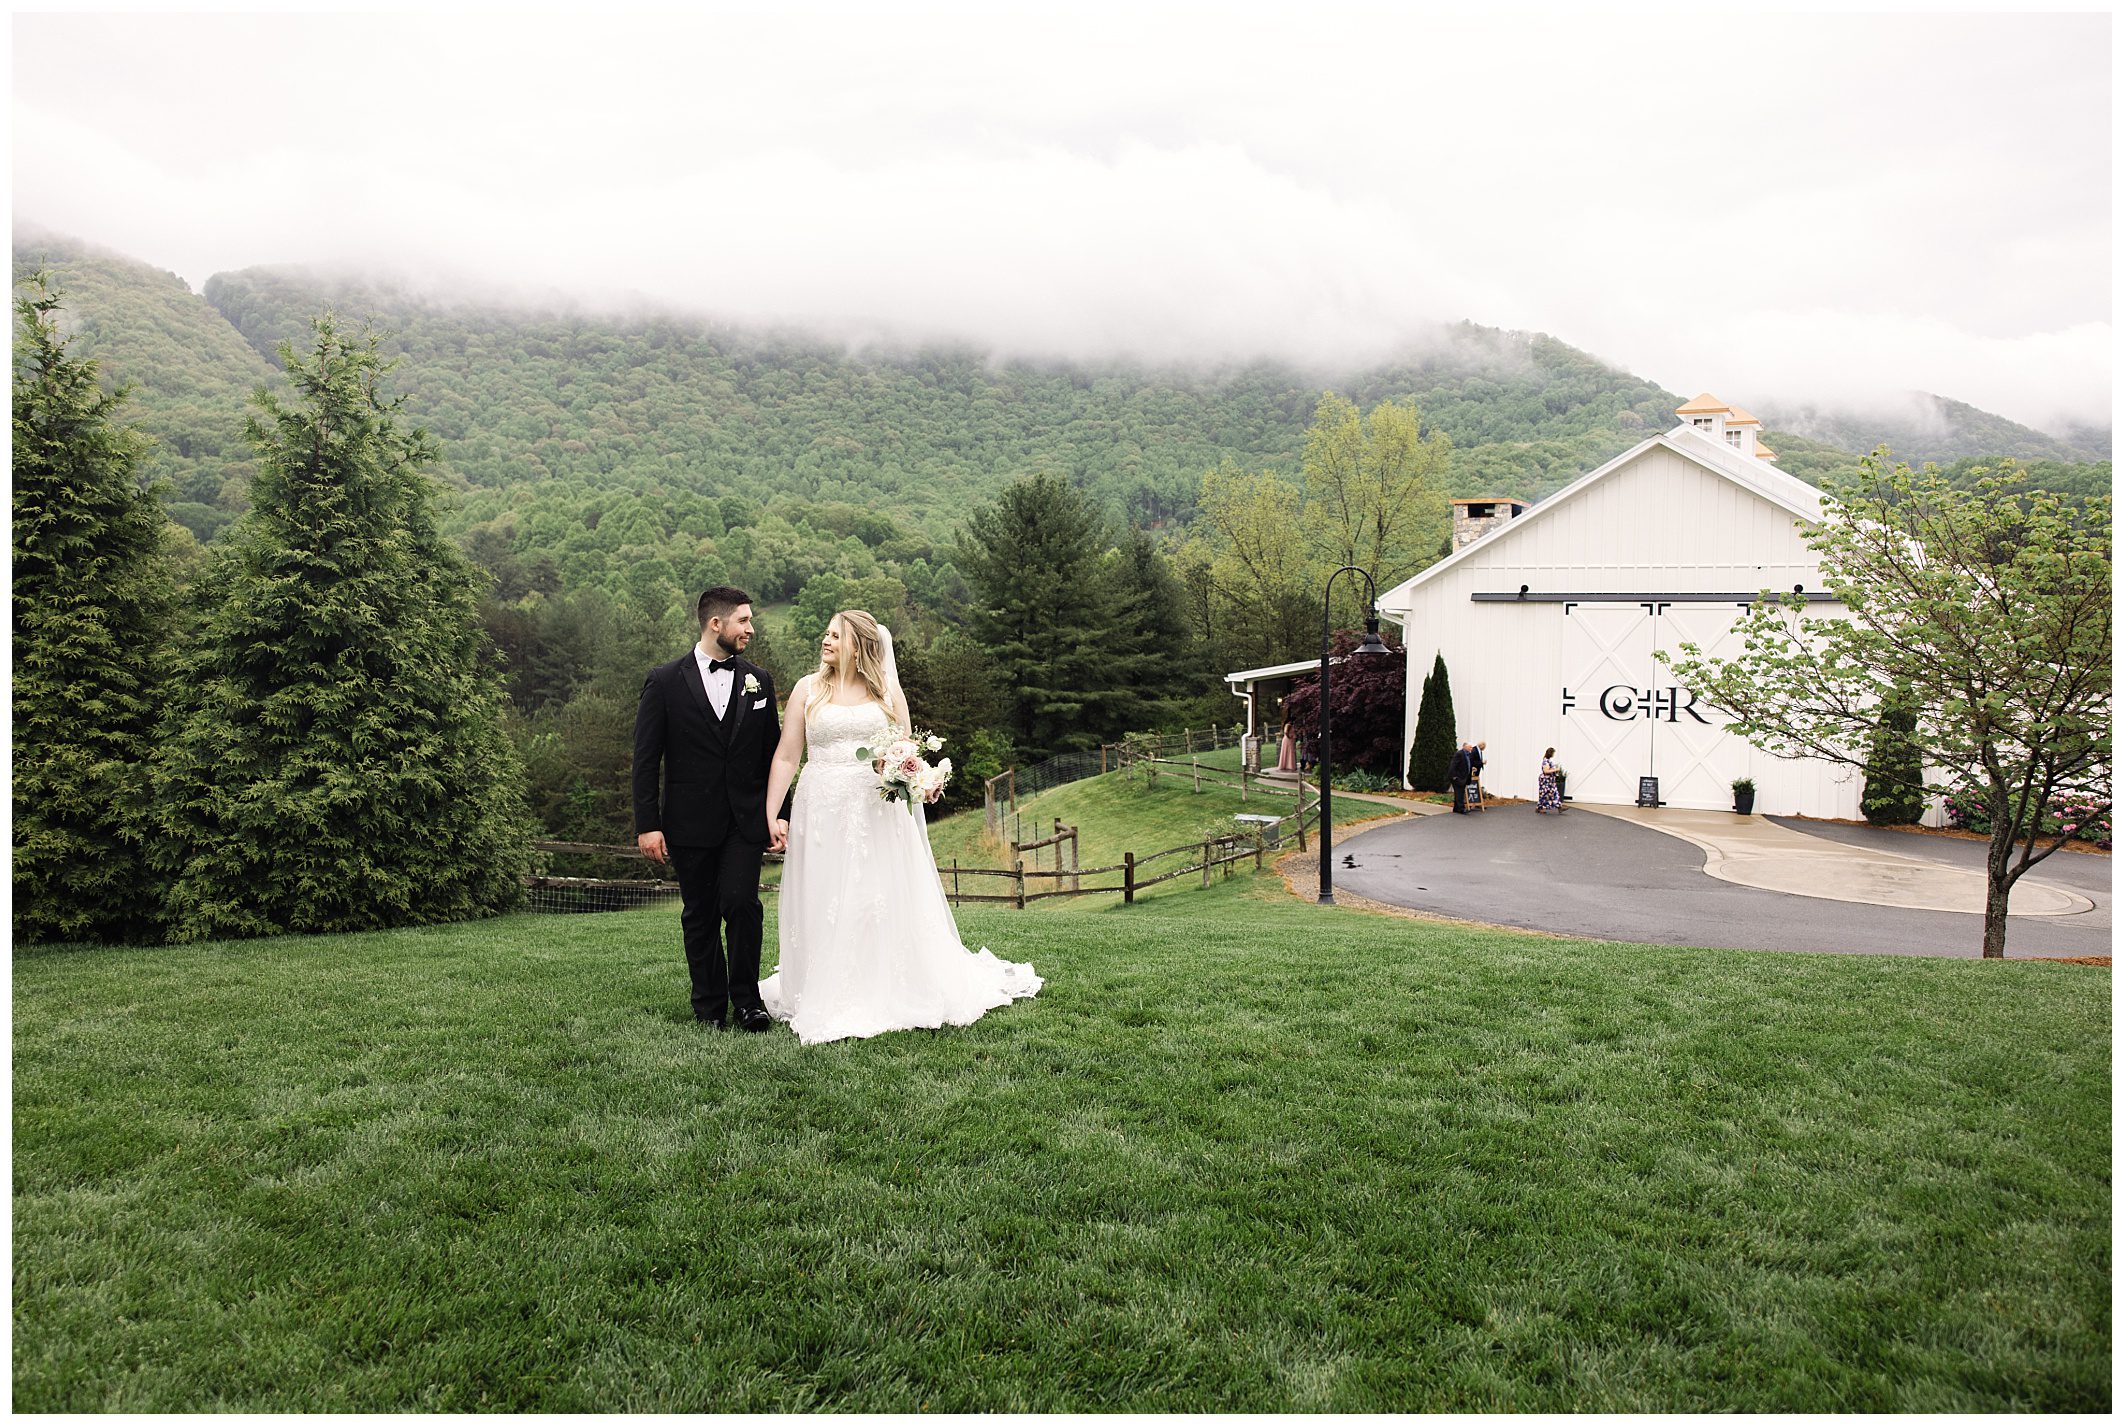 Bride and groom holding hands in a grassy field, with a white barn and misty mountains at Chestnut Ridge in the background.